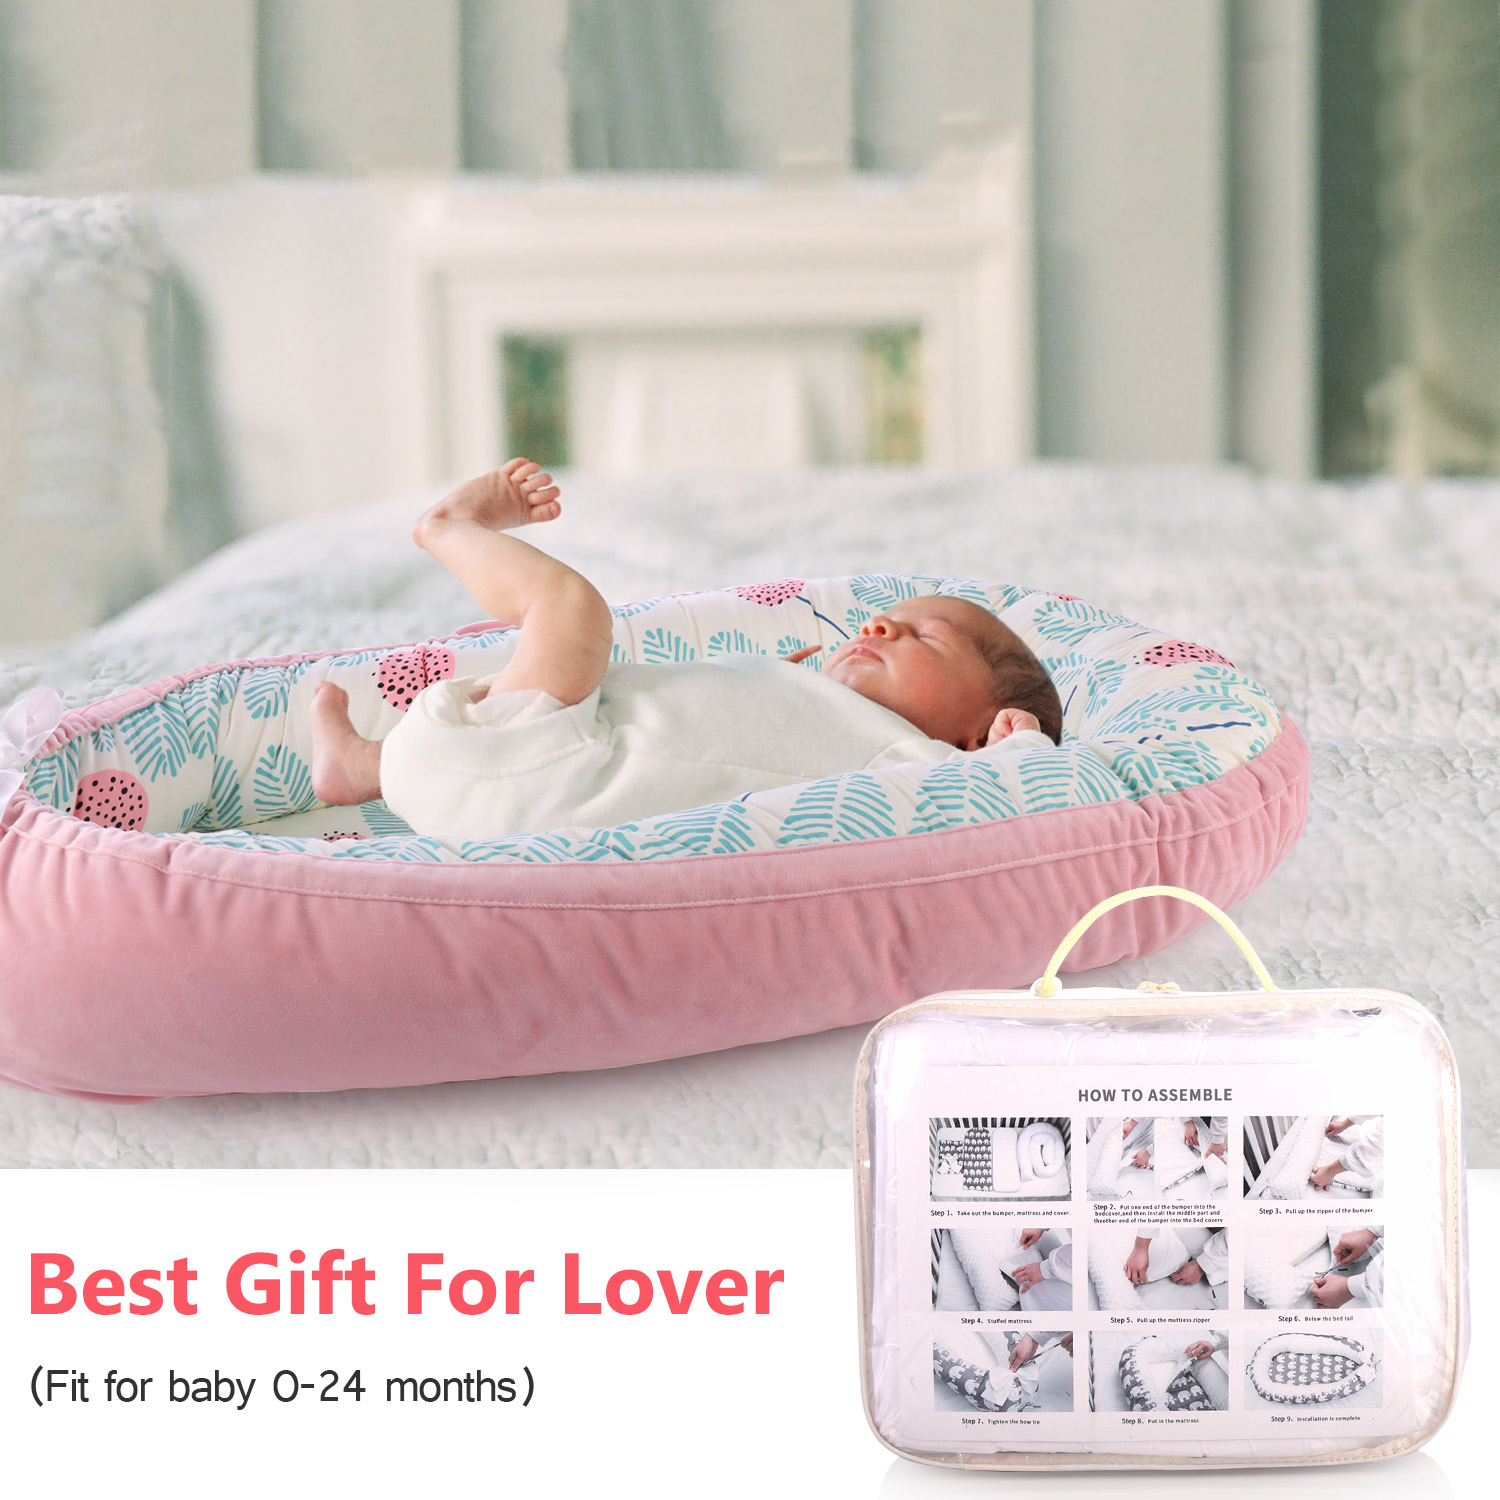 Comfortable 100% Cotton Portable Newborn Sleeper Baby Lounger Nest Rainbow White Machine Washable Cushion Soft for Baby in Bed Infant Lounger with Double-Sided Pillow Breathable 